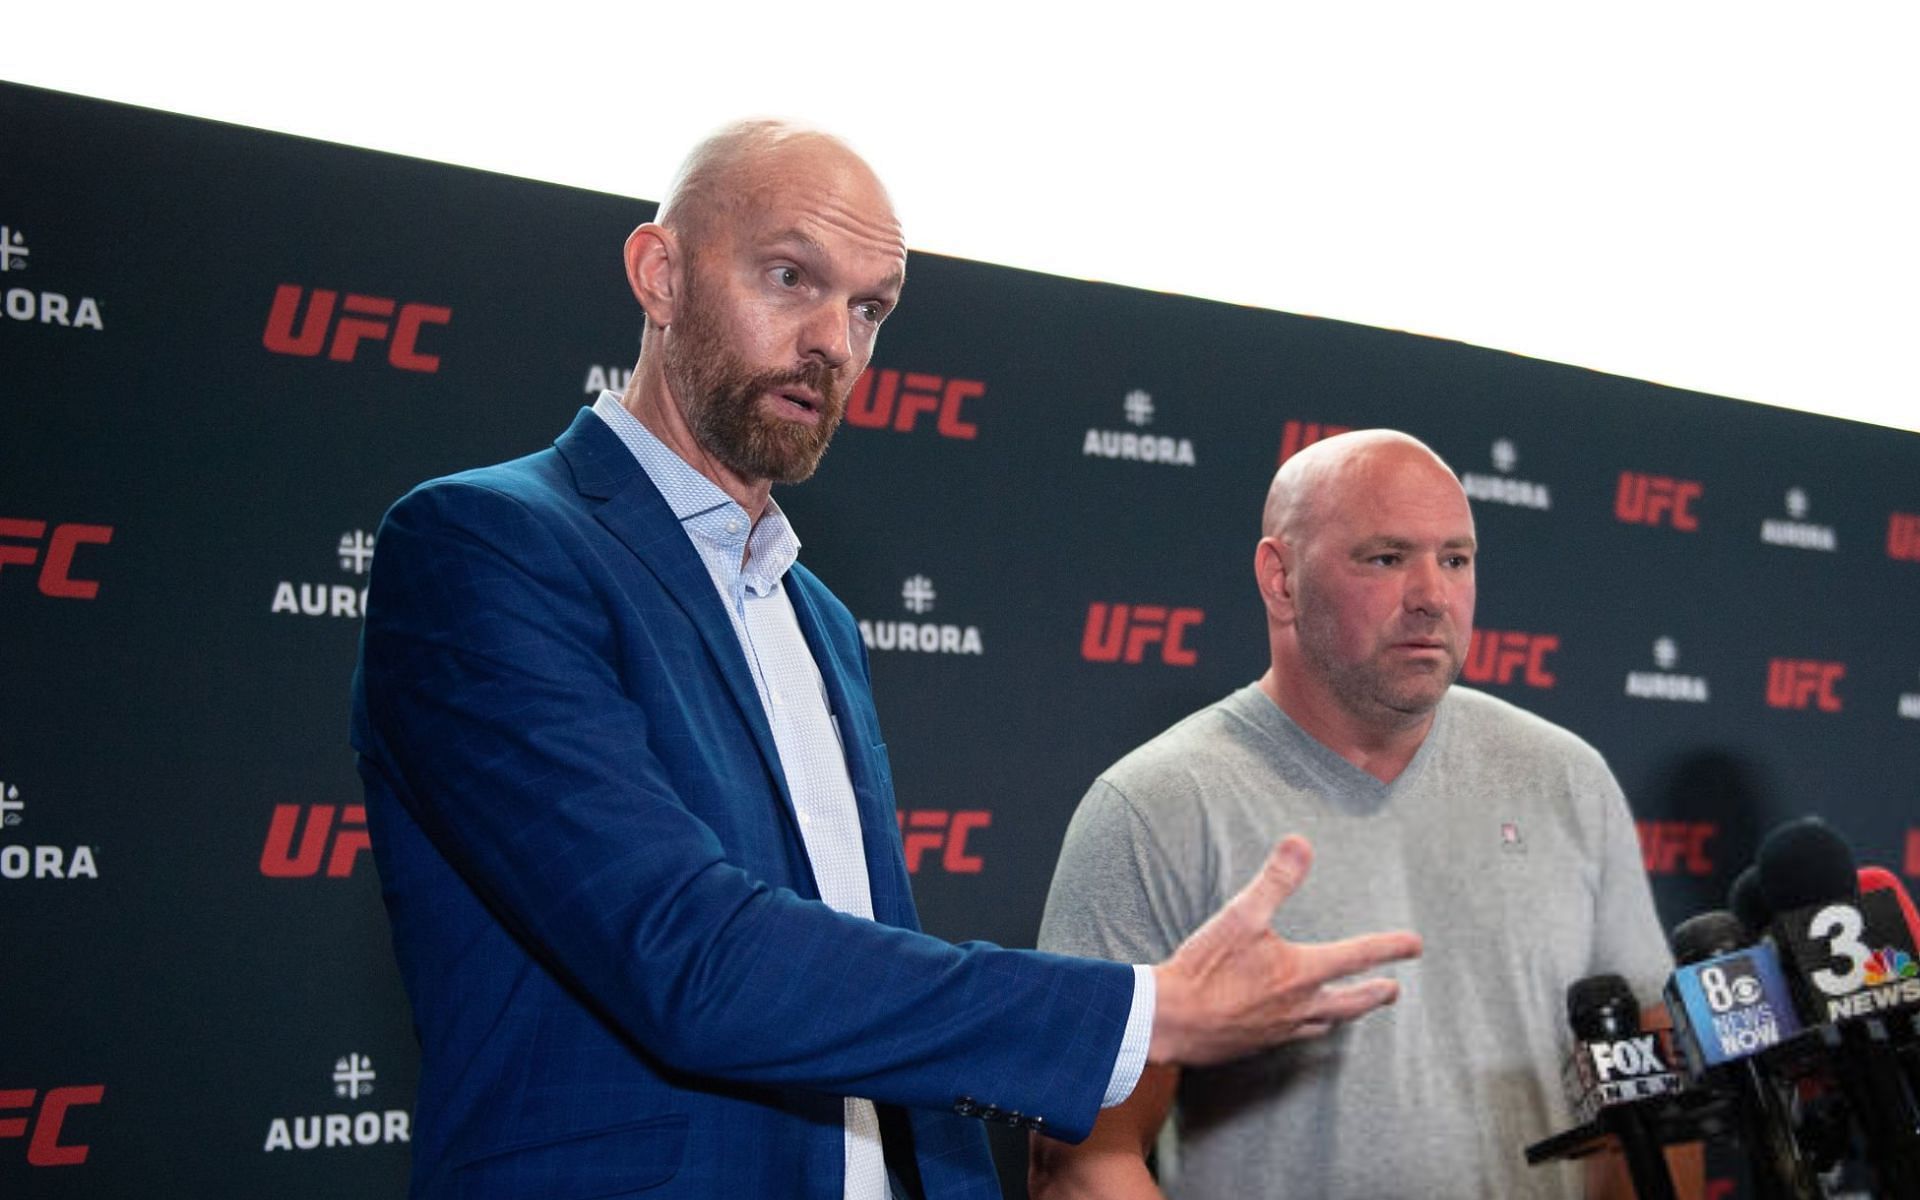 Jeff Novitzky (left) and Dana White (right) [Images Courtesy: @GettyImages]